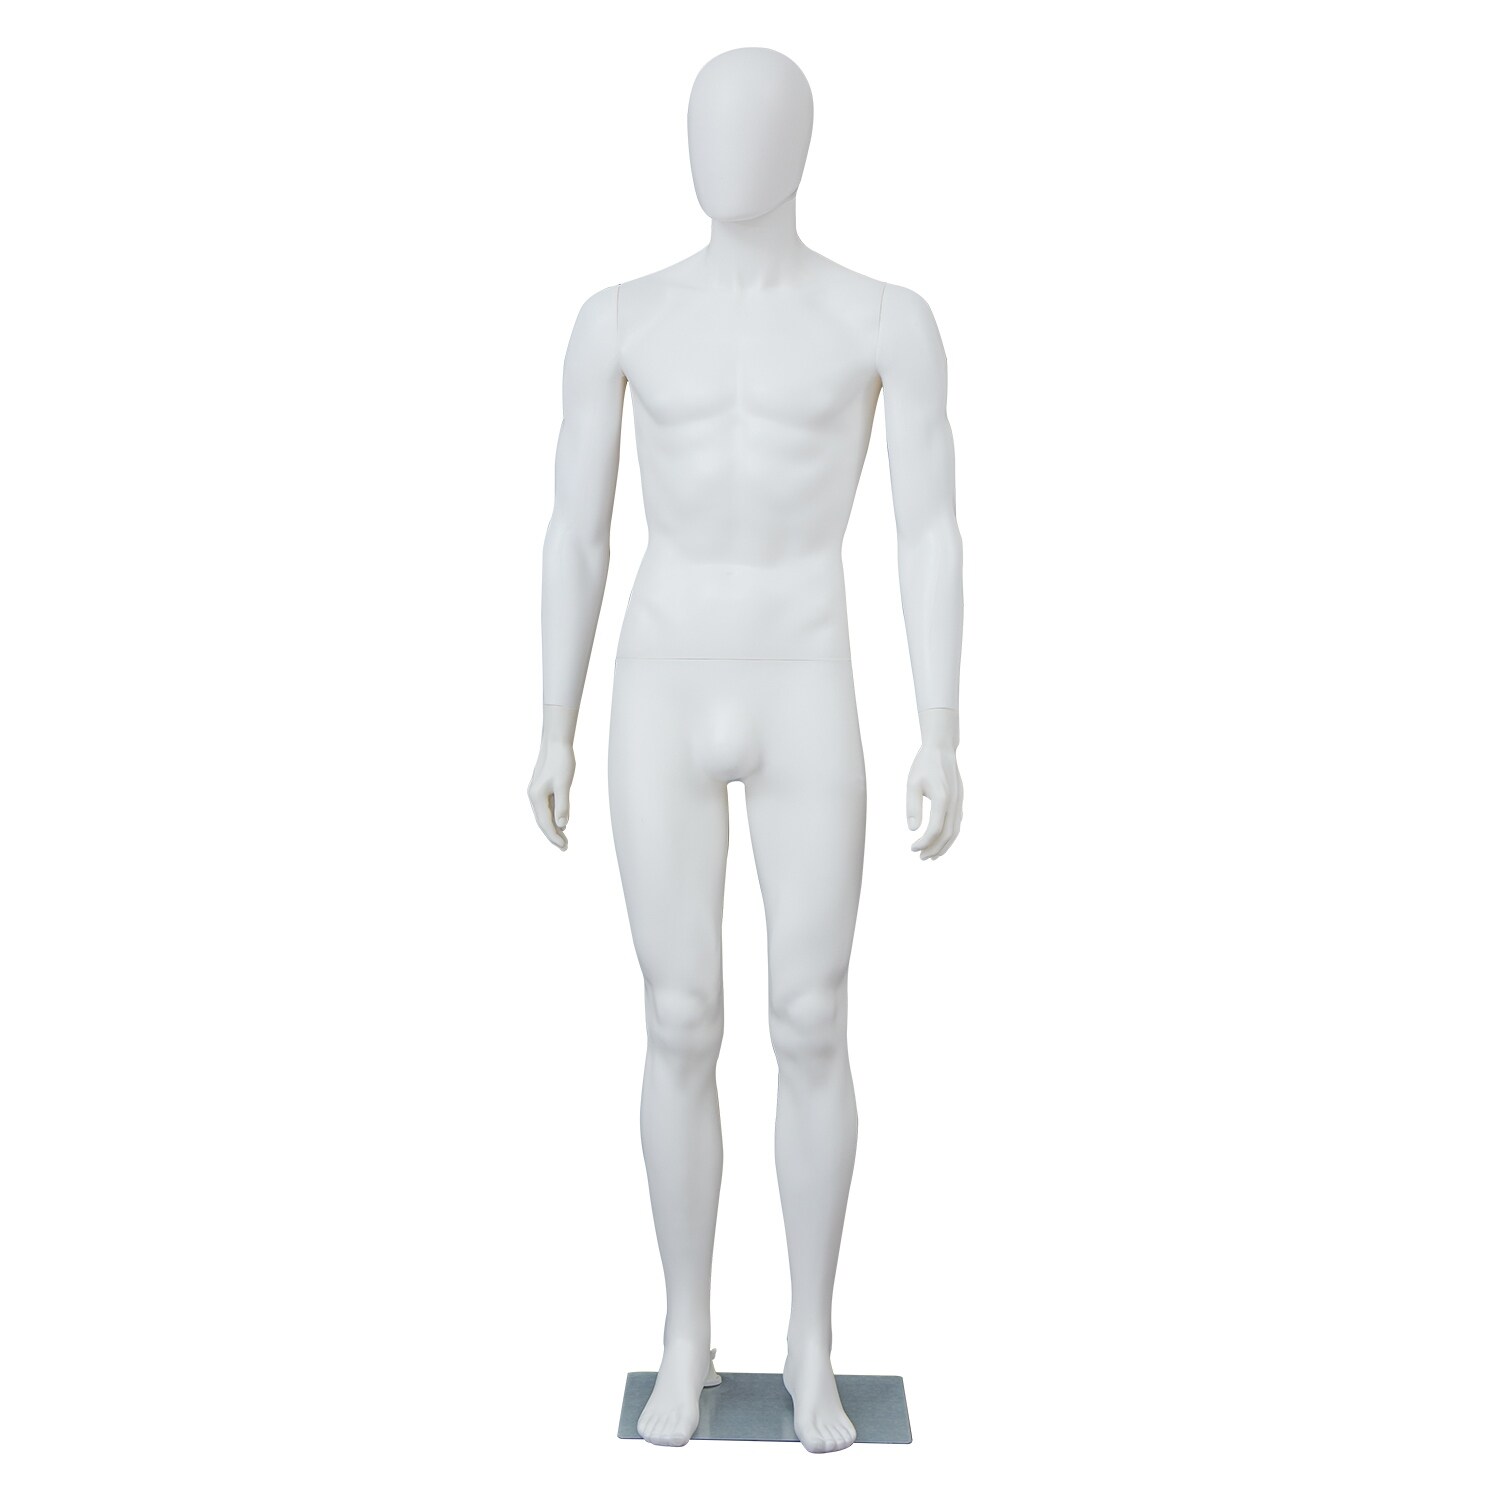 A Shop Retail Model Male Window Cloth Display Full Body Adjustable Mannequin Famyfamy Male Mannequin Full Body Manikin for Windowshop Clothes Display 